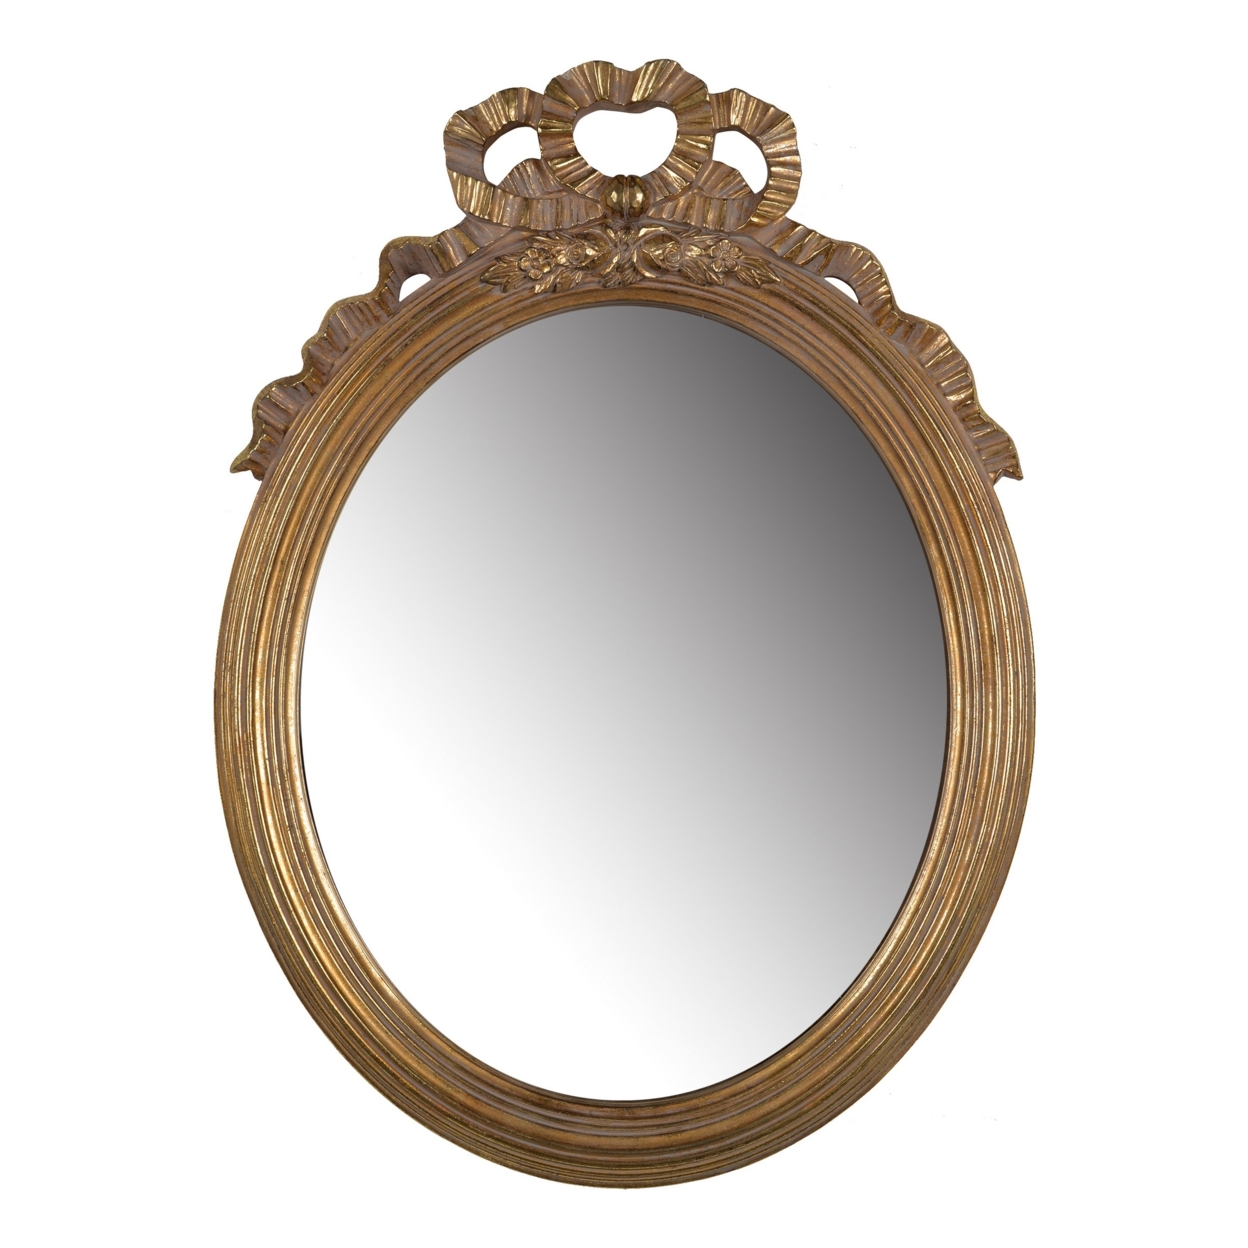 26 Inch Wall Accent Mirror With Ornate Polyresin Floral Crest, Antique Gold- Saltoro Sherpi